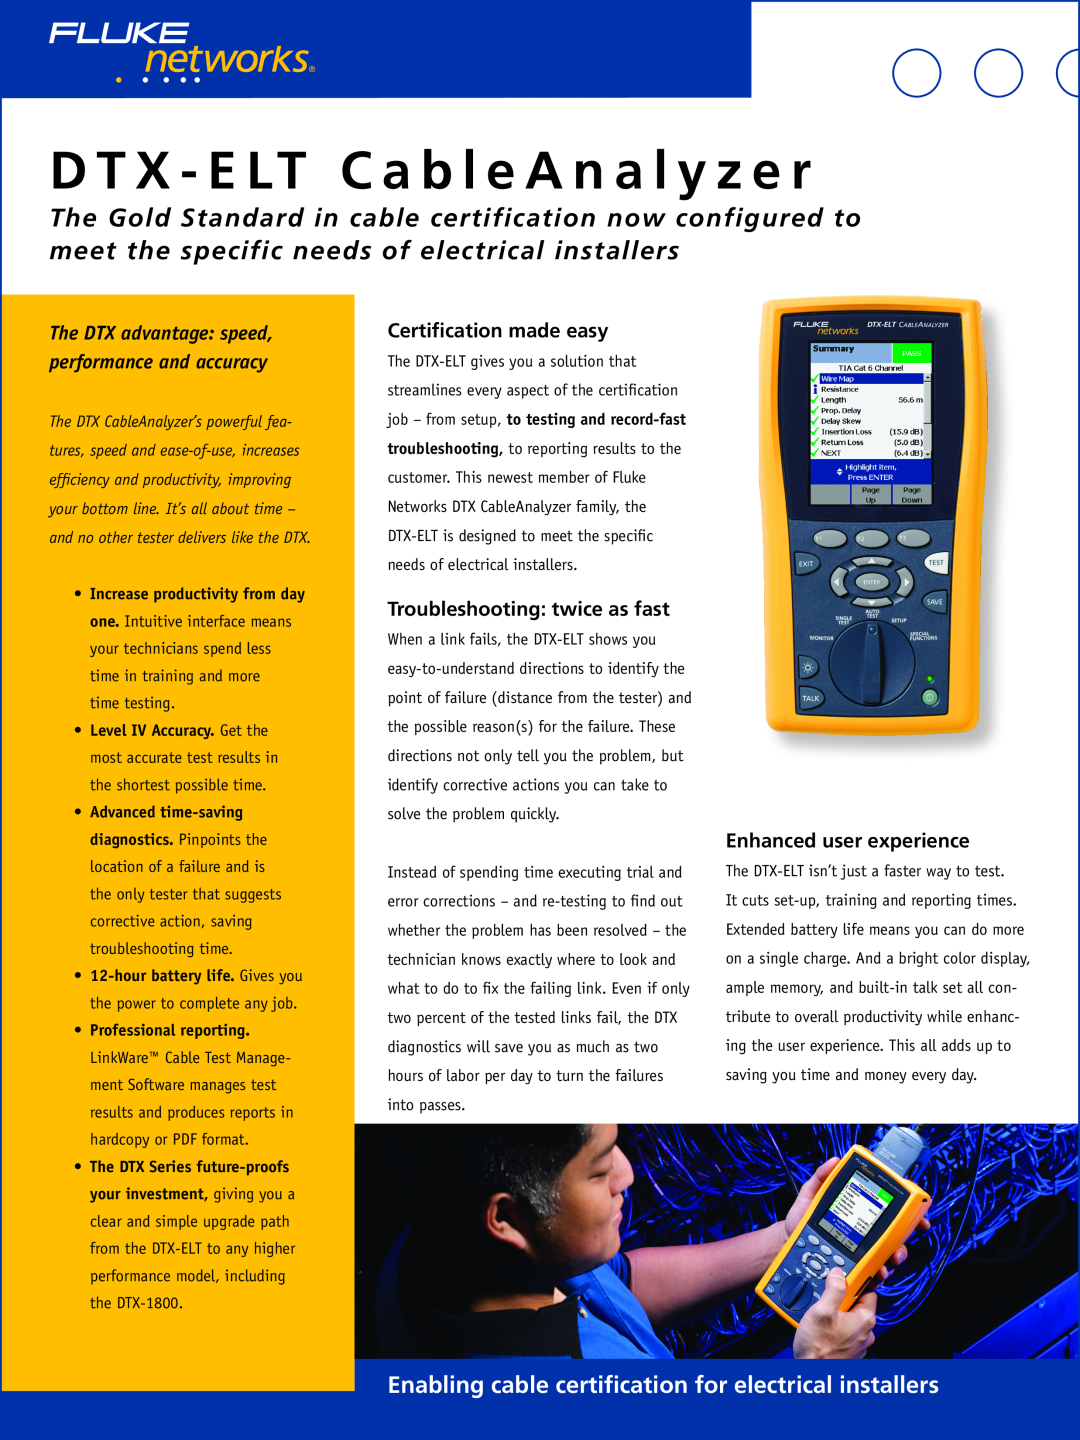 Fluke DTX-ELT manual Certification made easy, Troubleshooting twice as fast, Enhanced user experience 